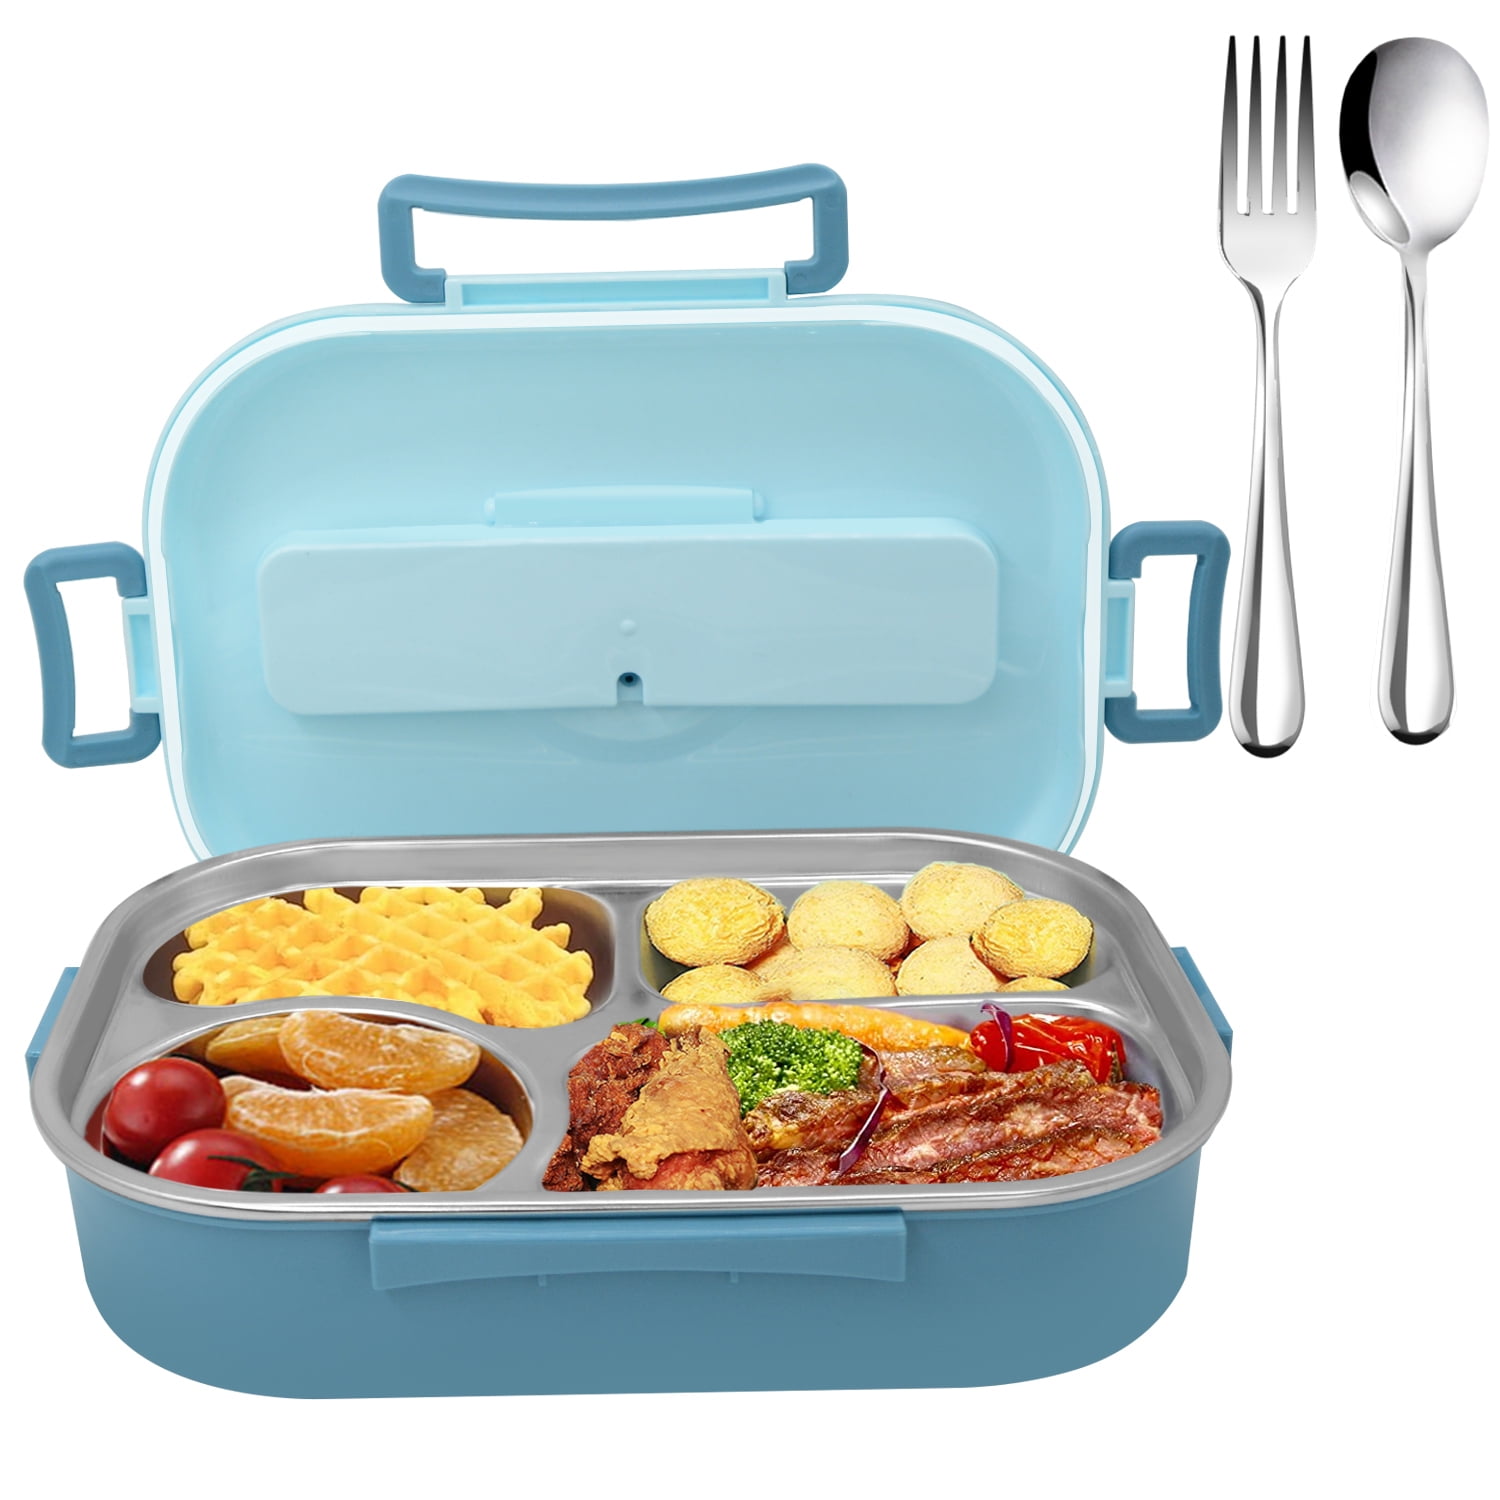 Restaurantware Bento Tek 41 oz Blue & White Buddha Box All-in-One Lunch Box - with Utensils, Sauce Cup - 7 1/4 x 4 1/4 x 4 - 1 Count Box